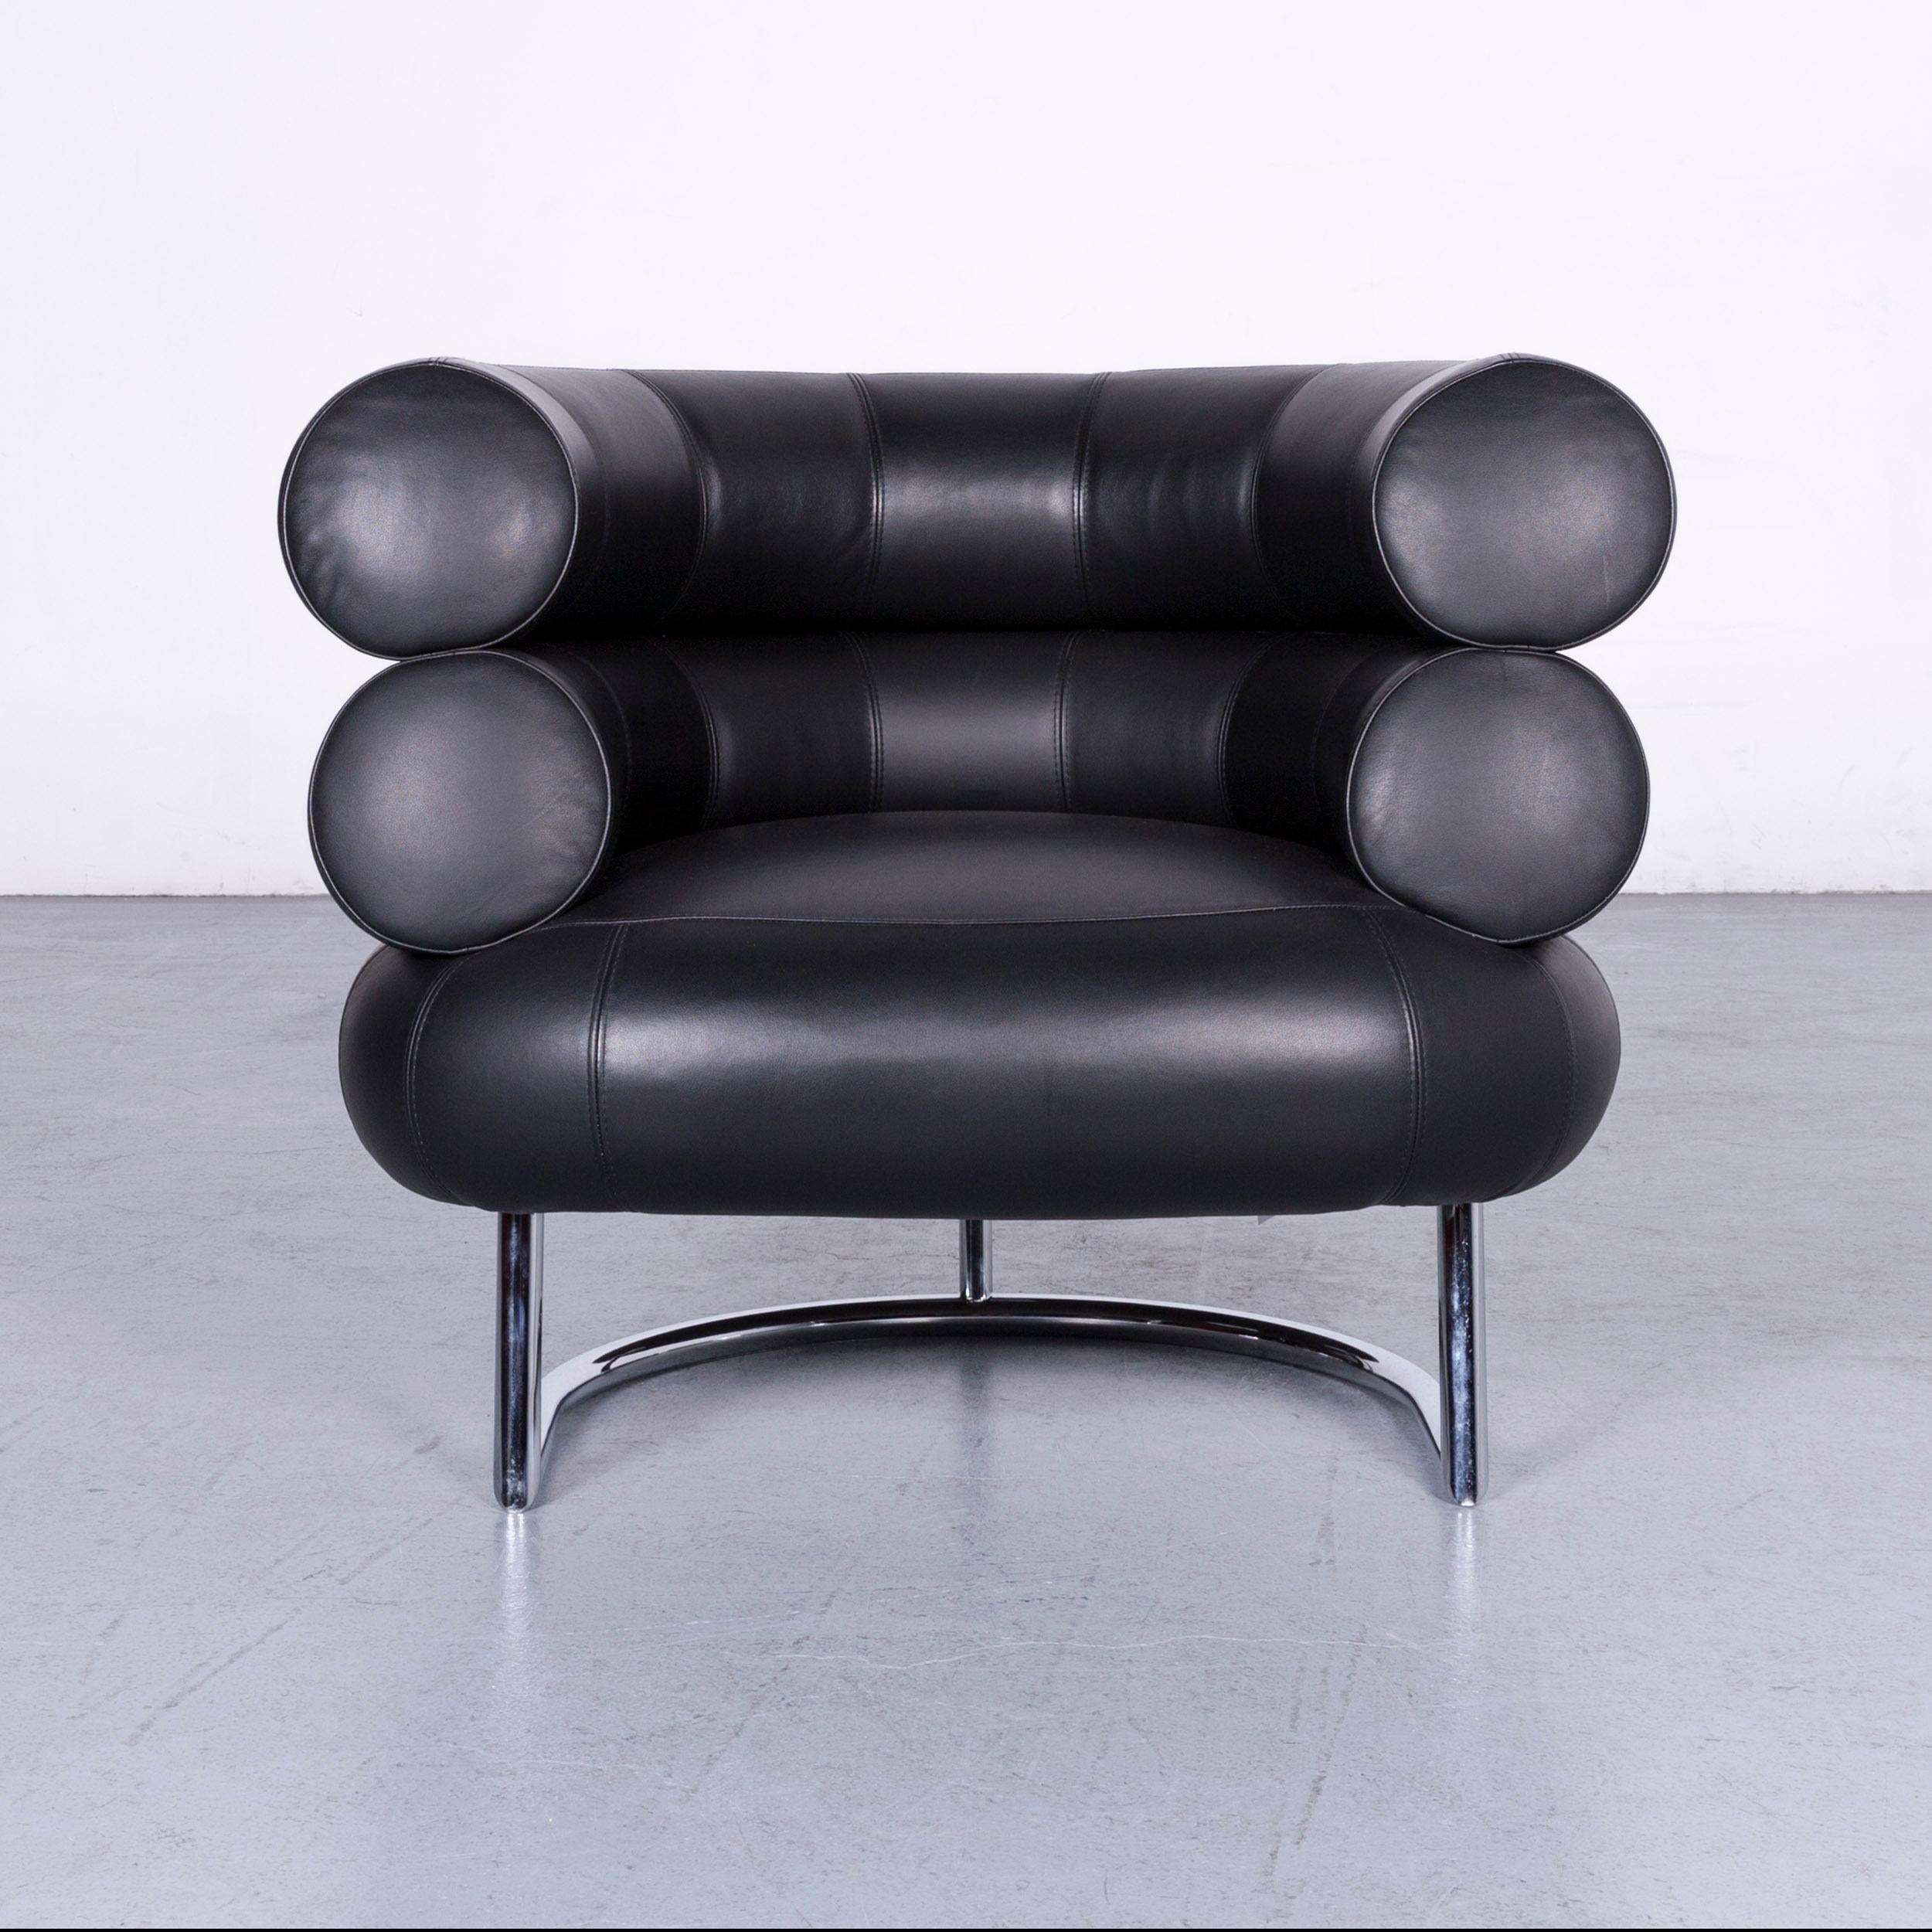 We bring to you a ClassiCon Bibendum chair designer leather armchair black genuine leather chair.

Product measurements in centimeters:

Depth 80
Width 90
Height 70
Seat-height 40
Rest-height 70
Seat-depth 55.

 

 